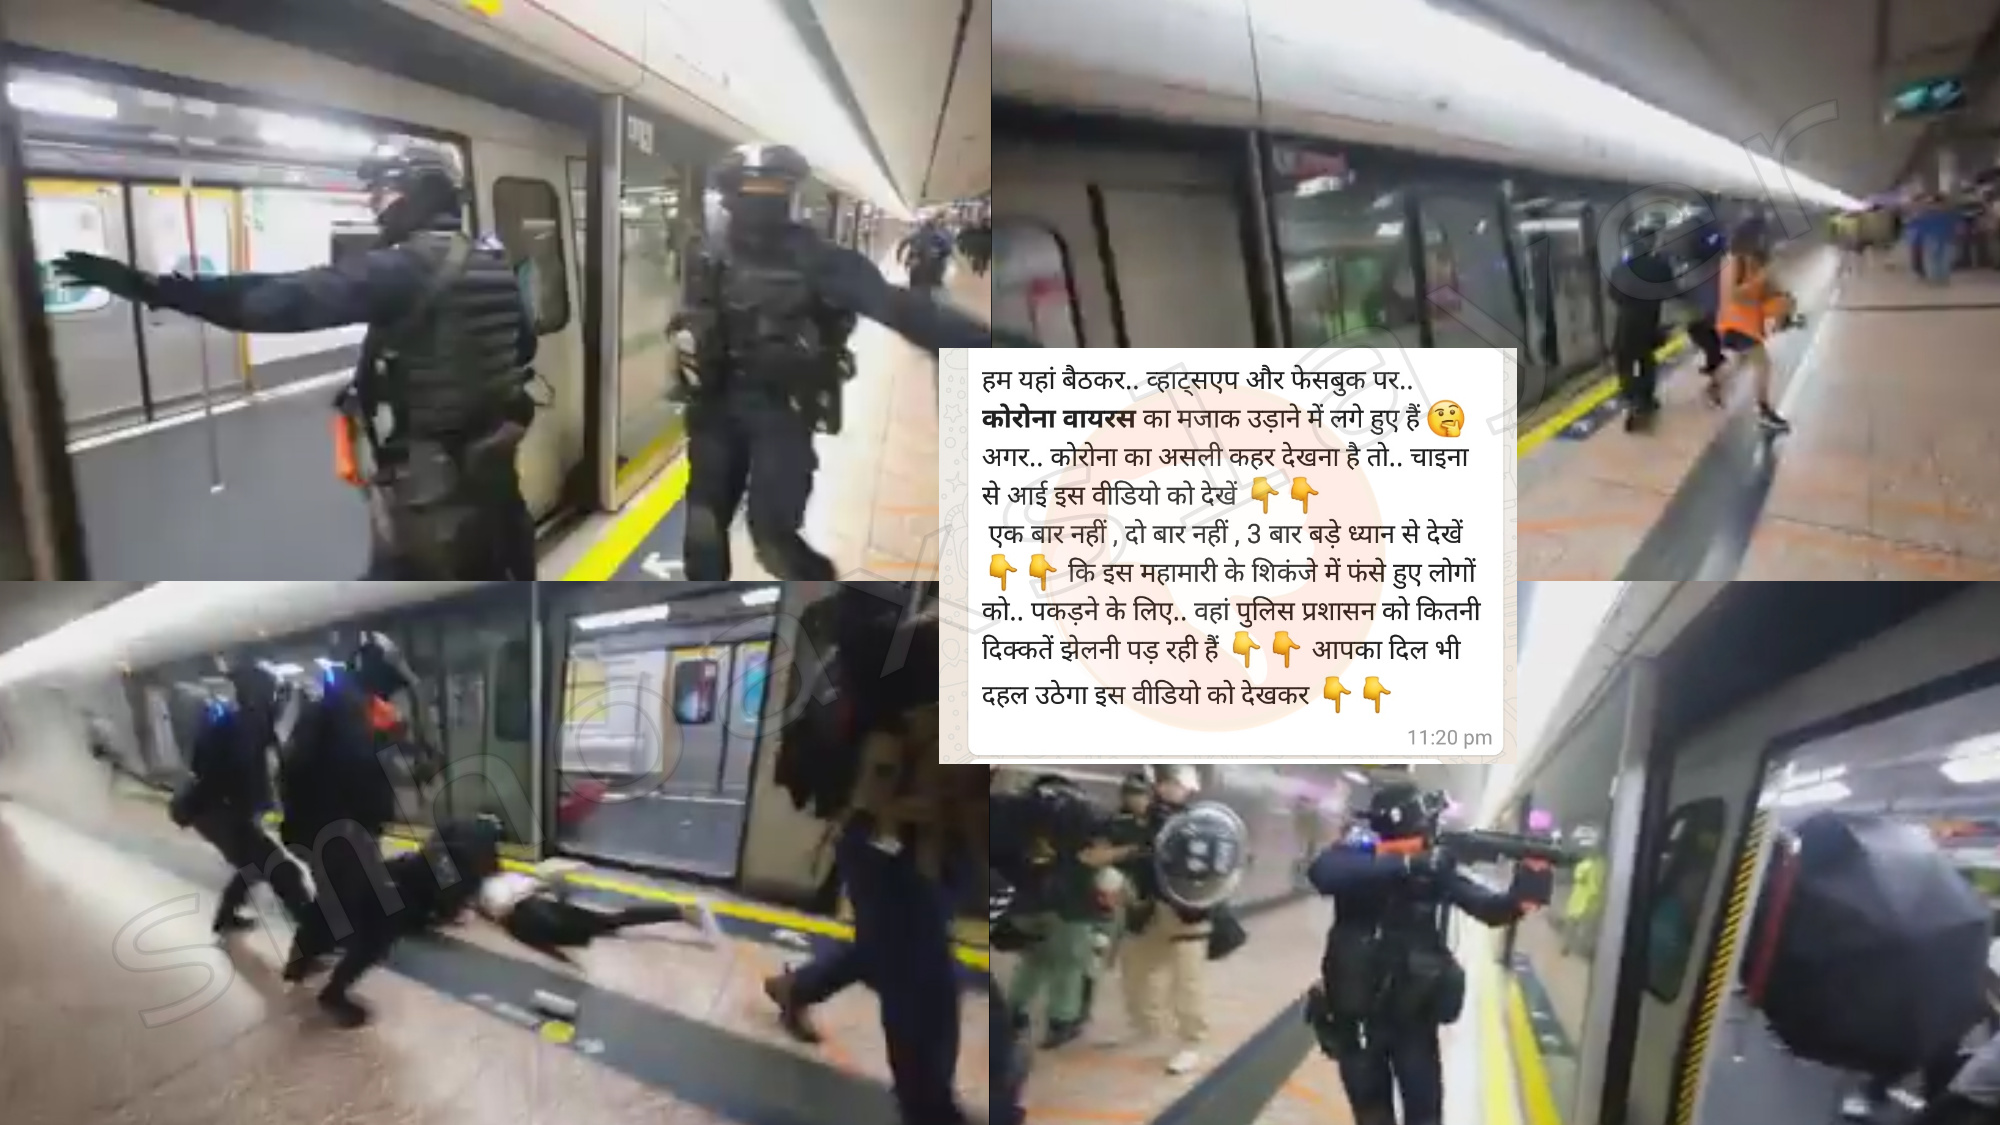 Last year's video is viral claiming Police trying to contain Corona patients in China in Metro. - Swachh Social Media Abhiyaan